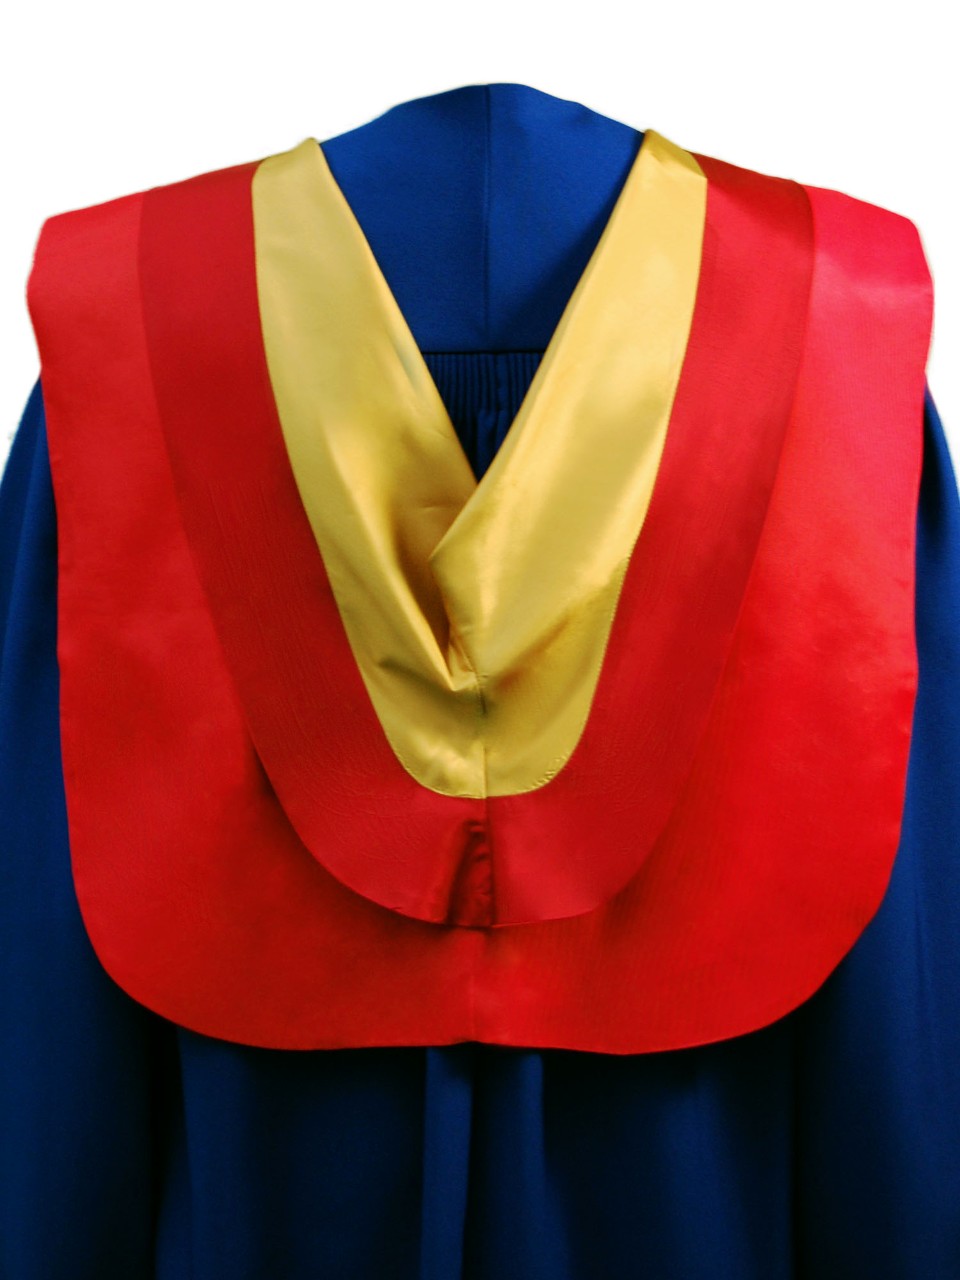 The Masters of Engineering hood is red with wide maroon border and gold underside.